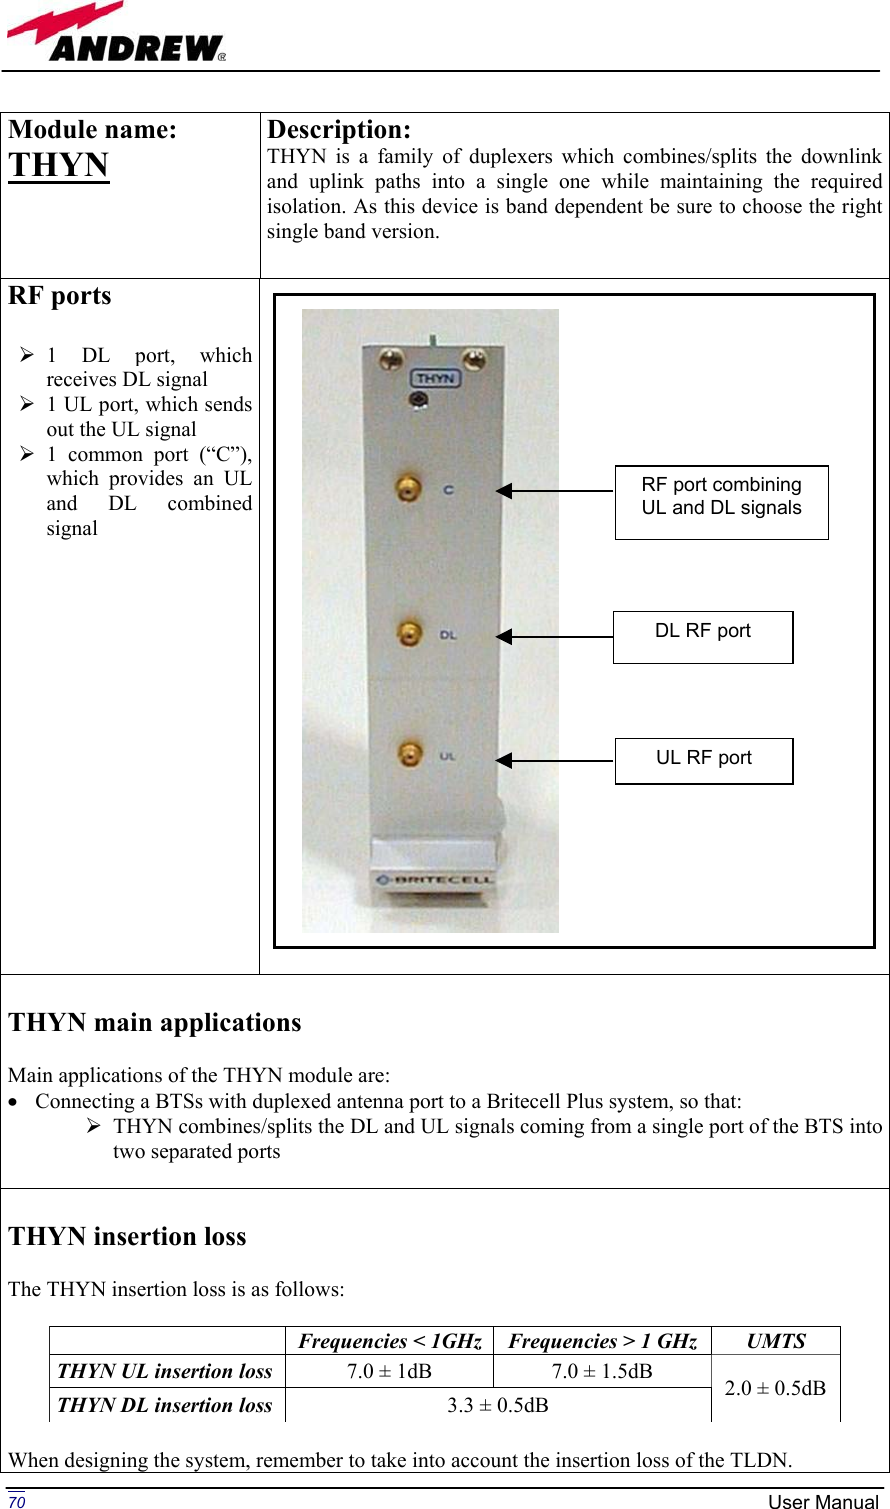 Page 70 of Andrew Wireless Innovations Group BCP-TFAM23 Model TFAM23 Downlink Booster User Manual MN024 04 rev3